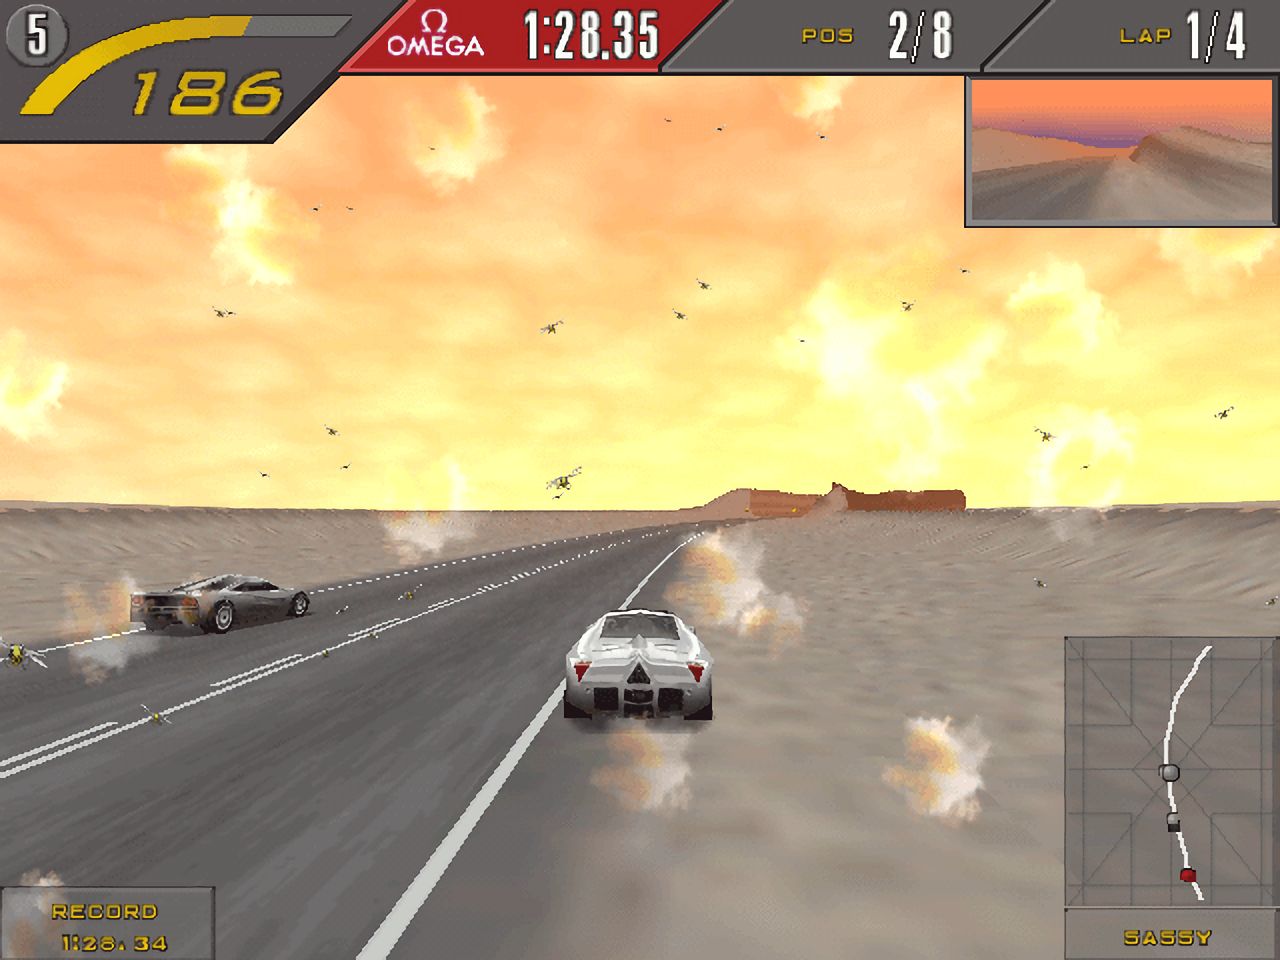 Need For Speed 2 Special Edition Download (1997 Simulation Game)